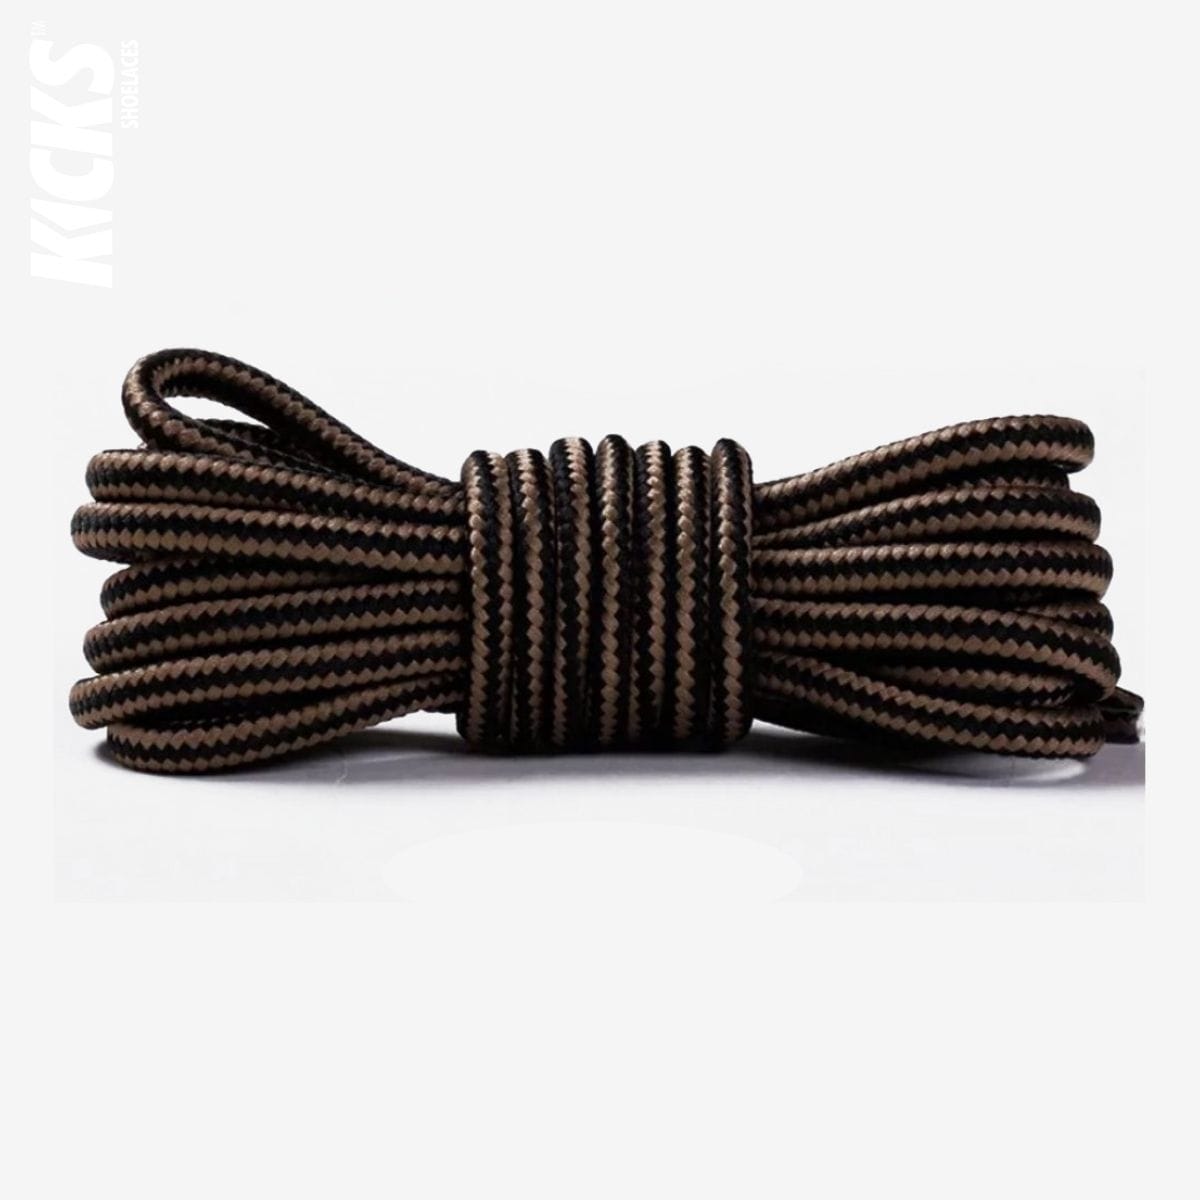 striped-two-color-shoelaces-for-casual-shoes-in-light-brown-and-black